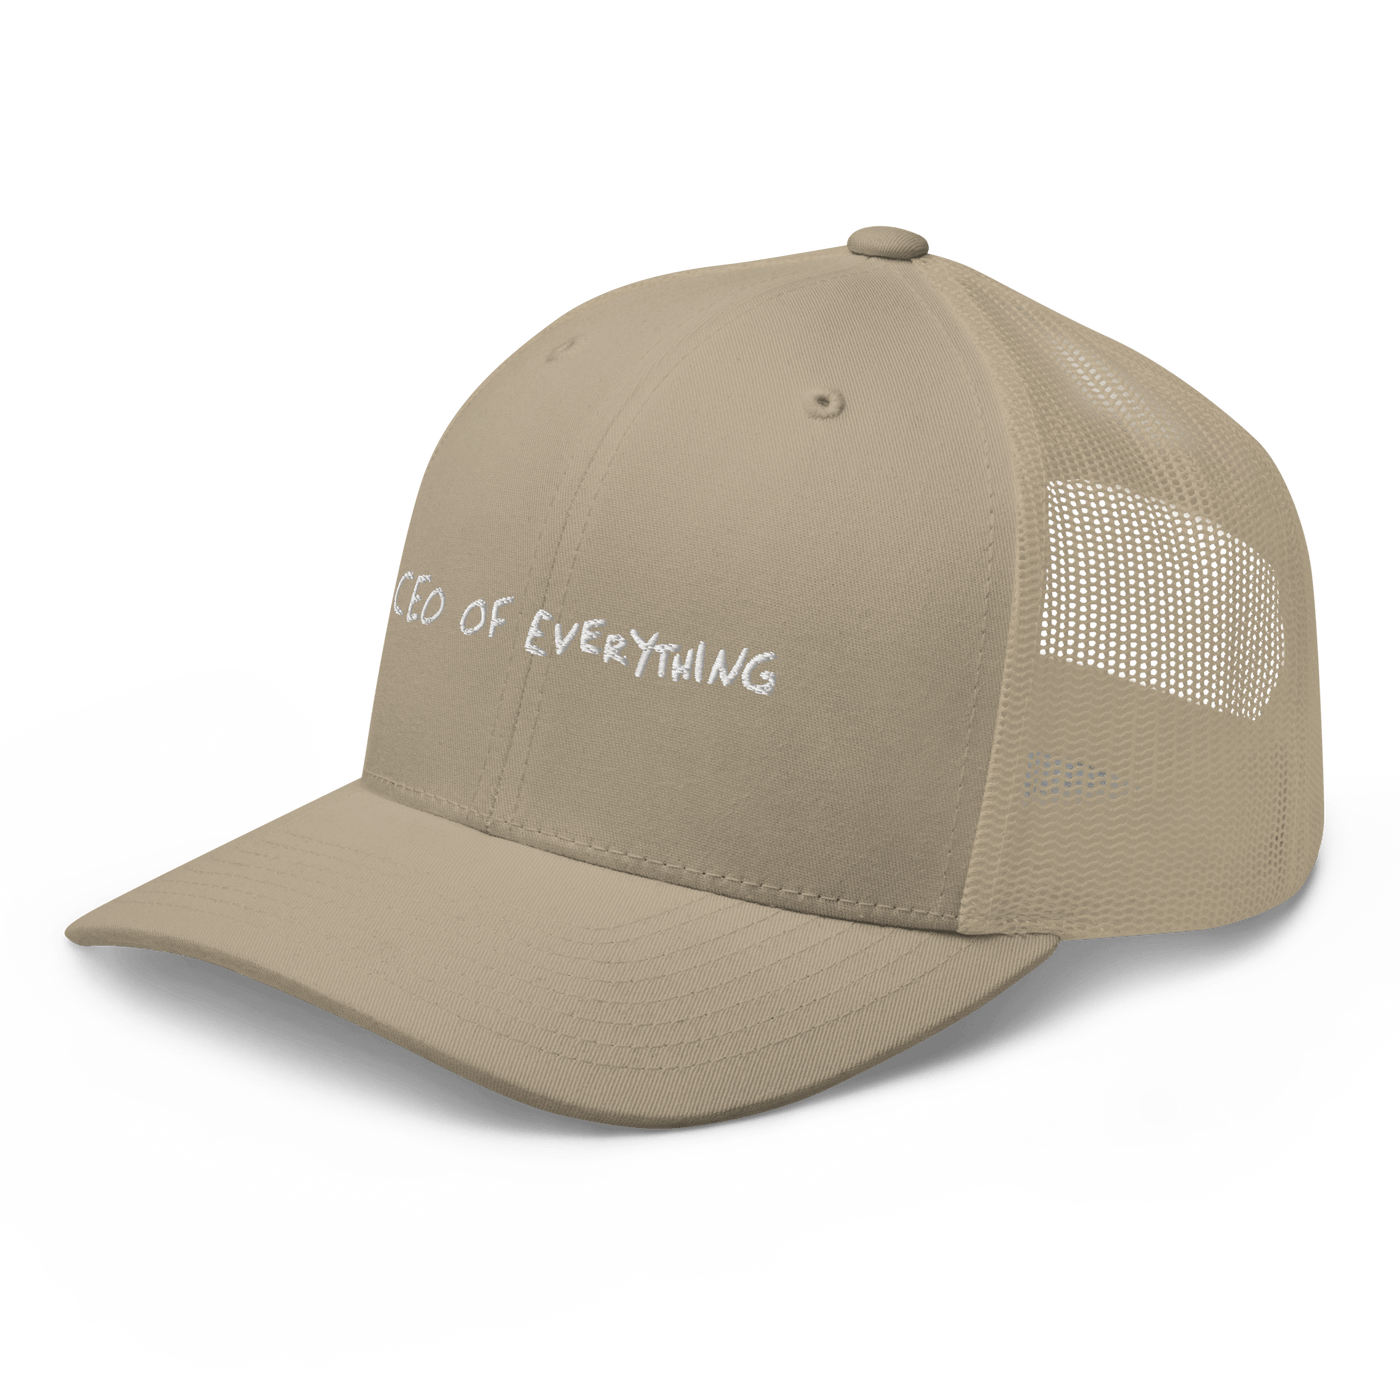 CEO of everything Trucker Cap - Khaki - - Just Another Cap Store